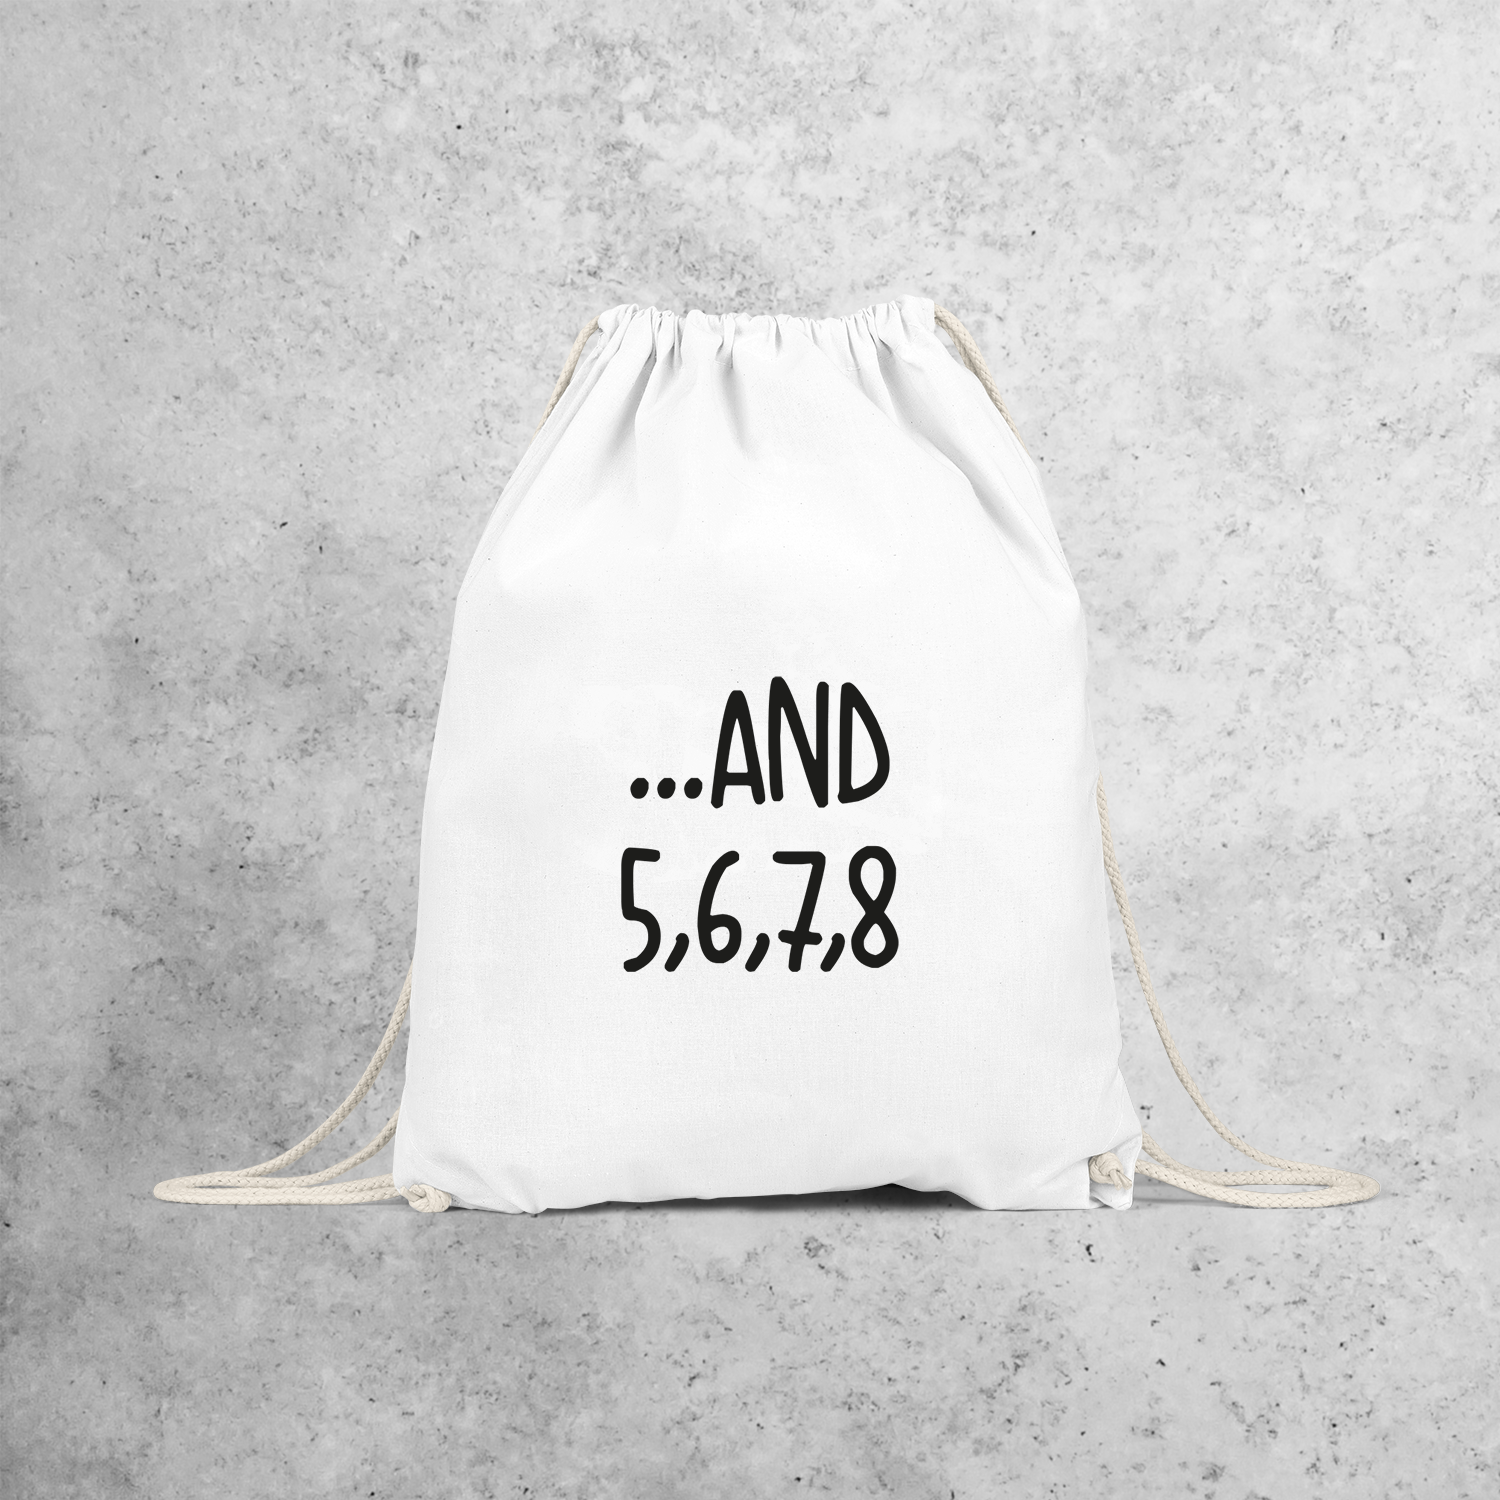 '...and 5, 6, 7, 8' backpack